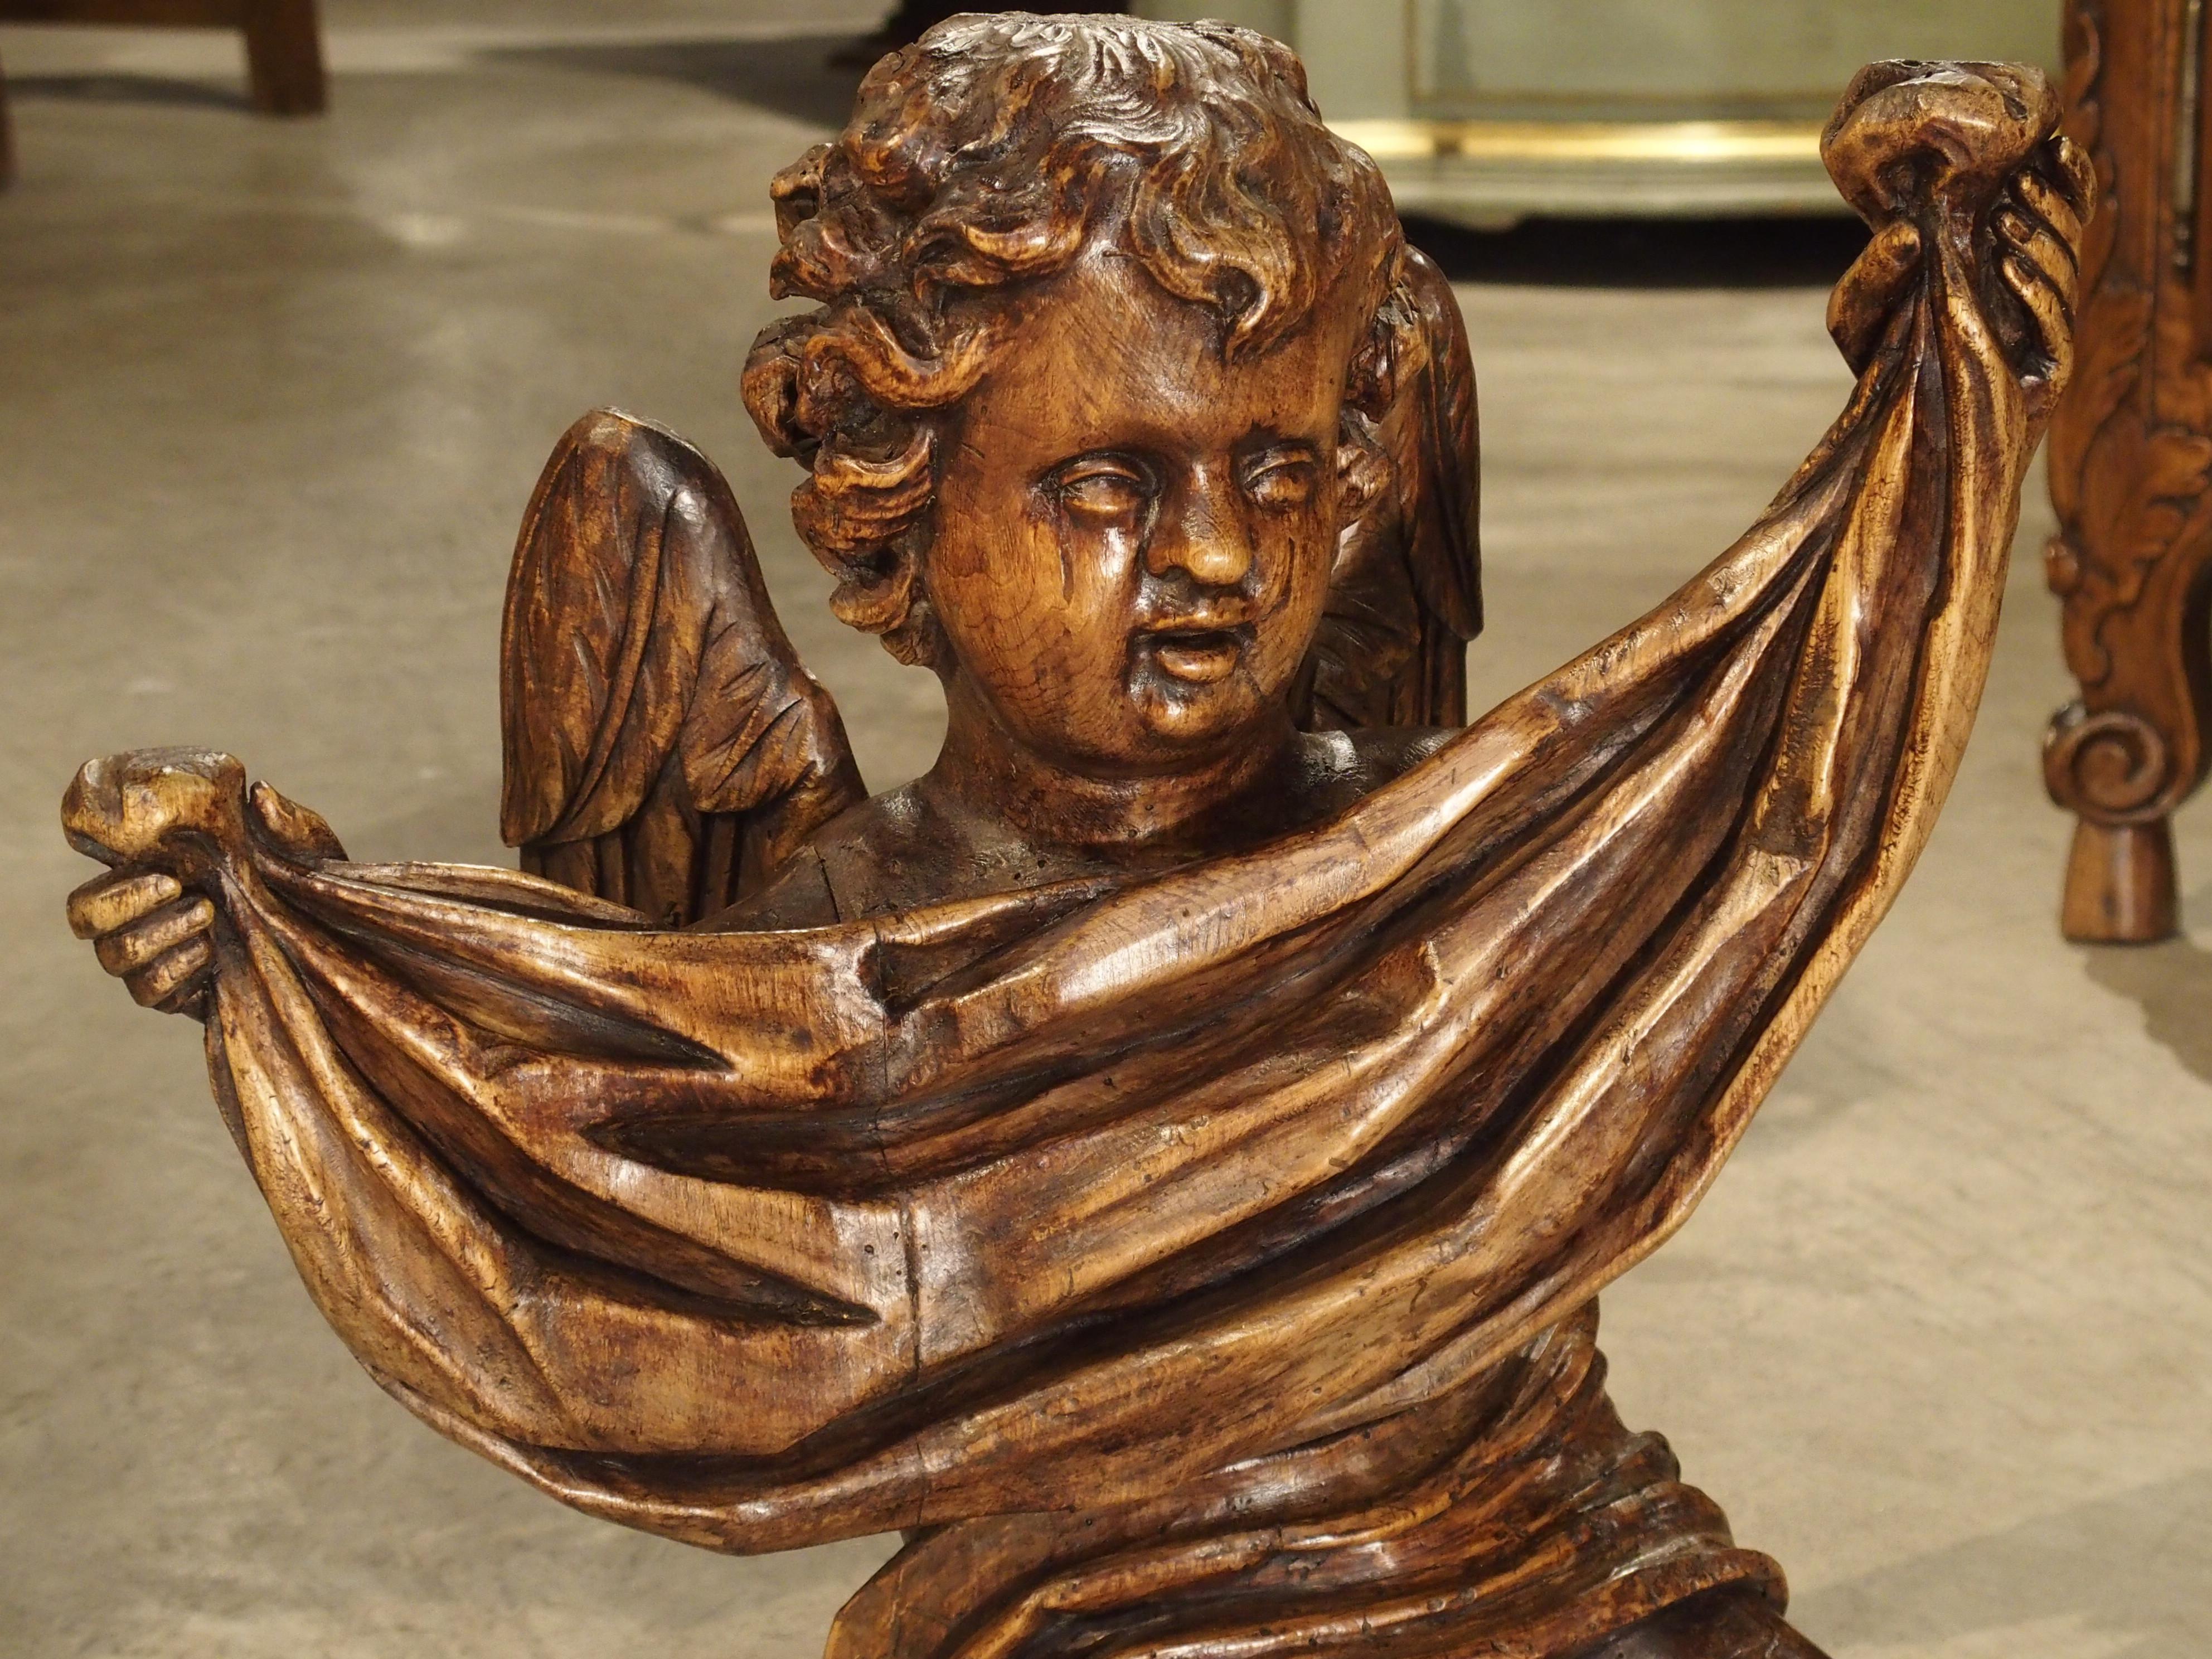 This hand carved seated cherub is of a nice size at nearly 23 inches tall. The cherub is holding a piece of draped cloth in front of its chest and still has both wings intact. The sculptor who carved this cherub was very good at the figural